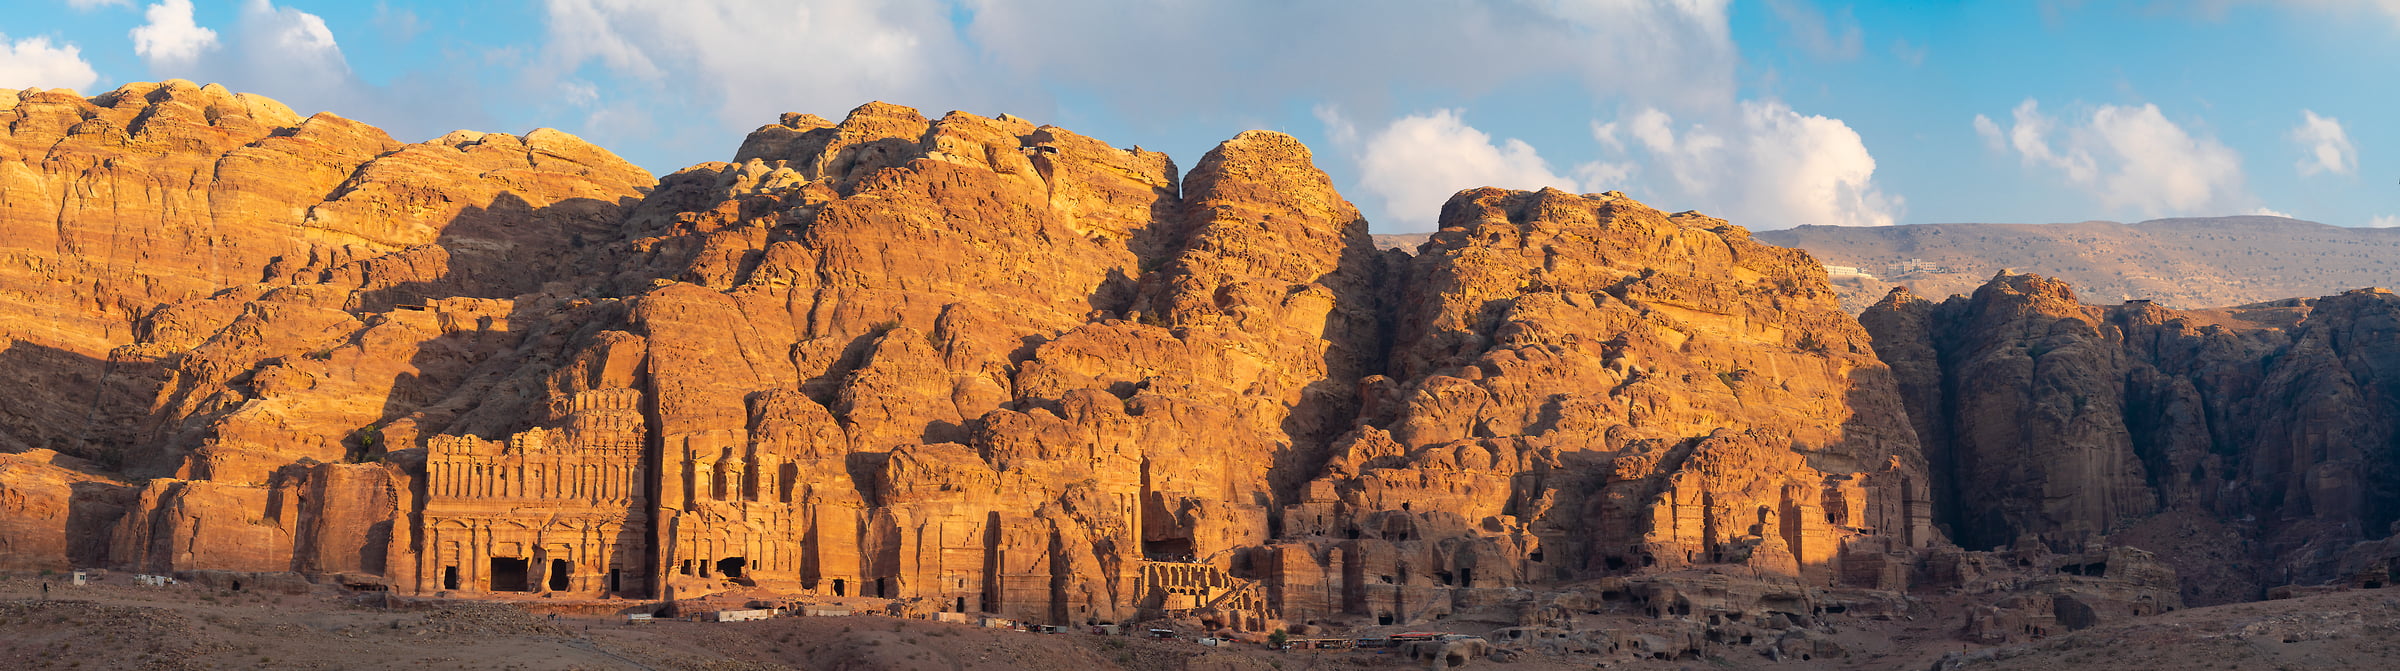 508 megapixels! A very high resolution, large-format VAST photo print of the tombs at Petra, Jordan; photograph created by Greg Probst in Petra, Jordan.